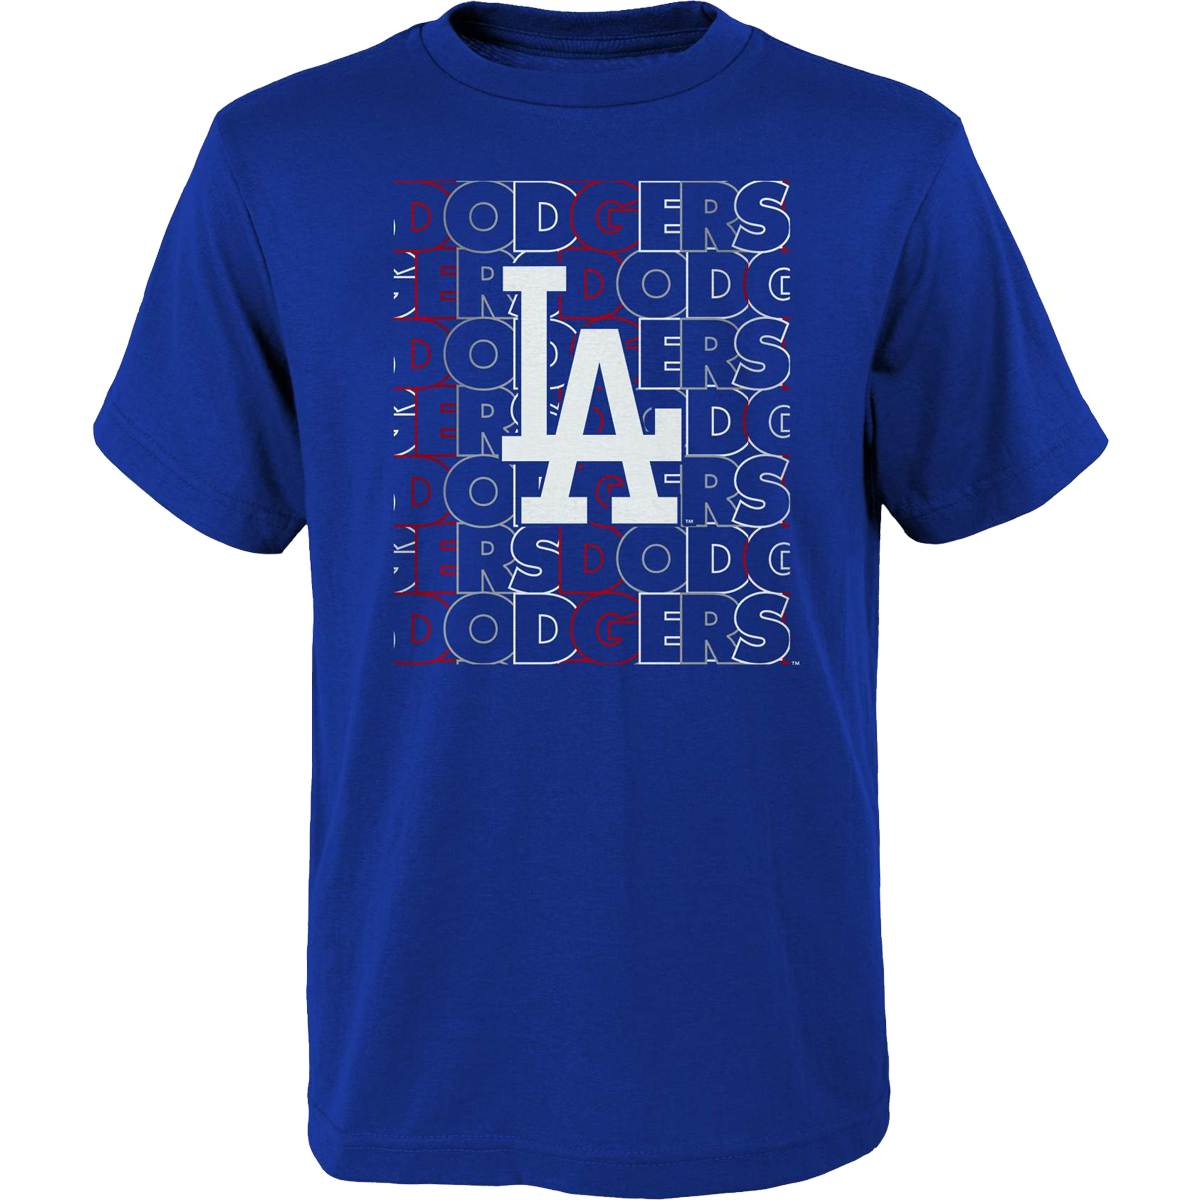 Youth Dodgers Letterman Tee alternate view